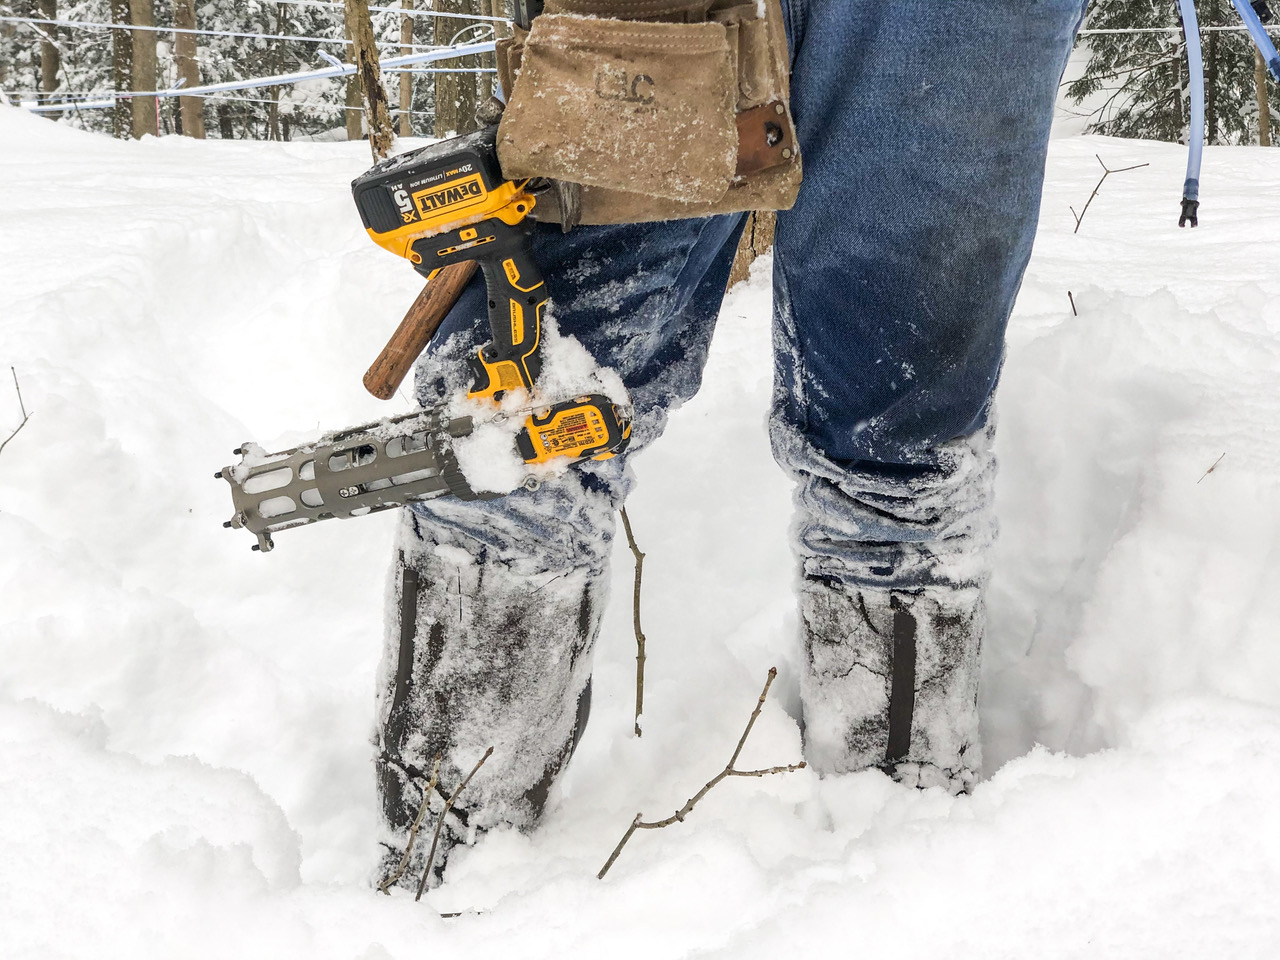 Drill used on trees and Muck boots in the snow